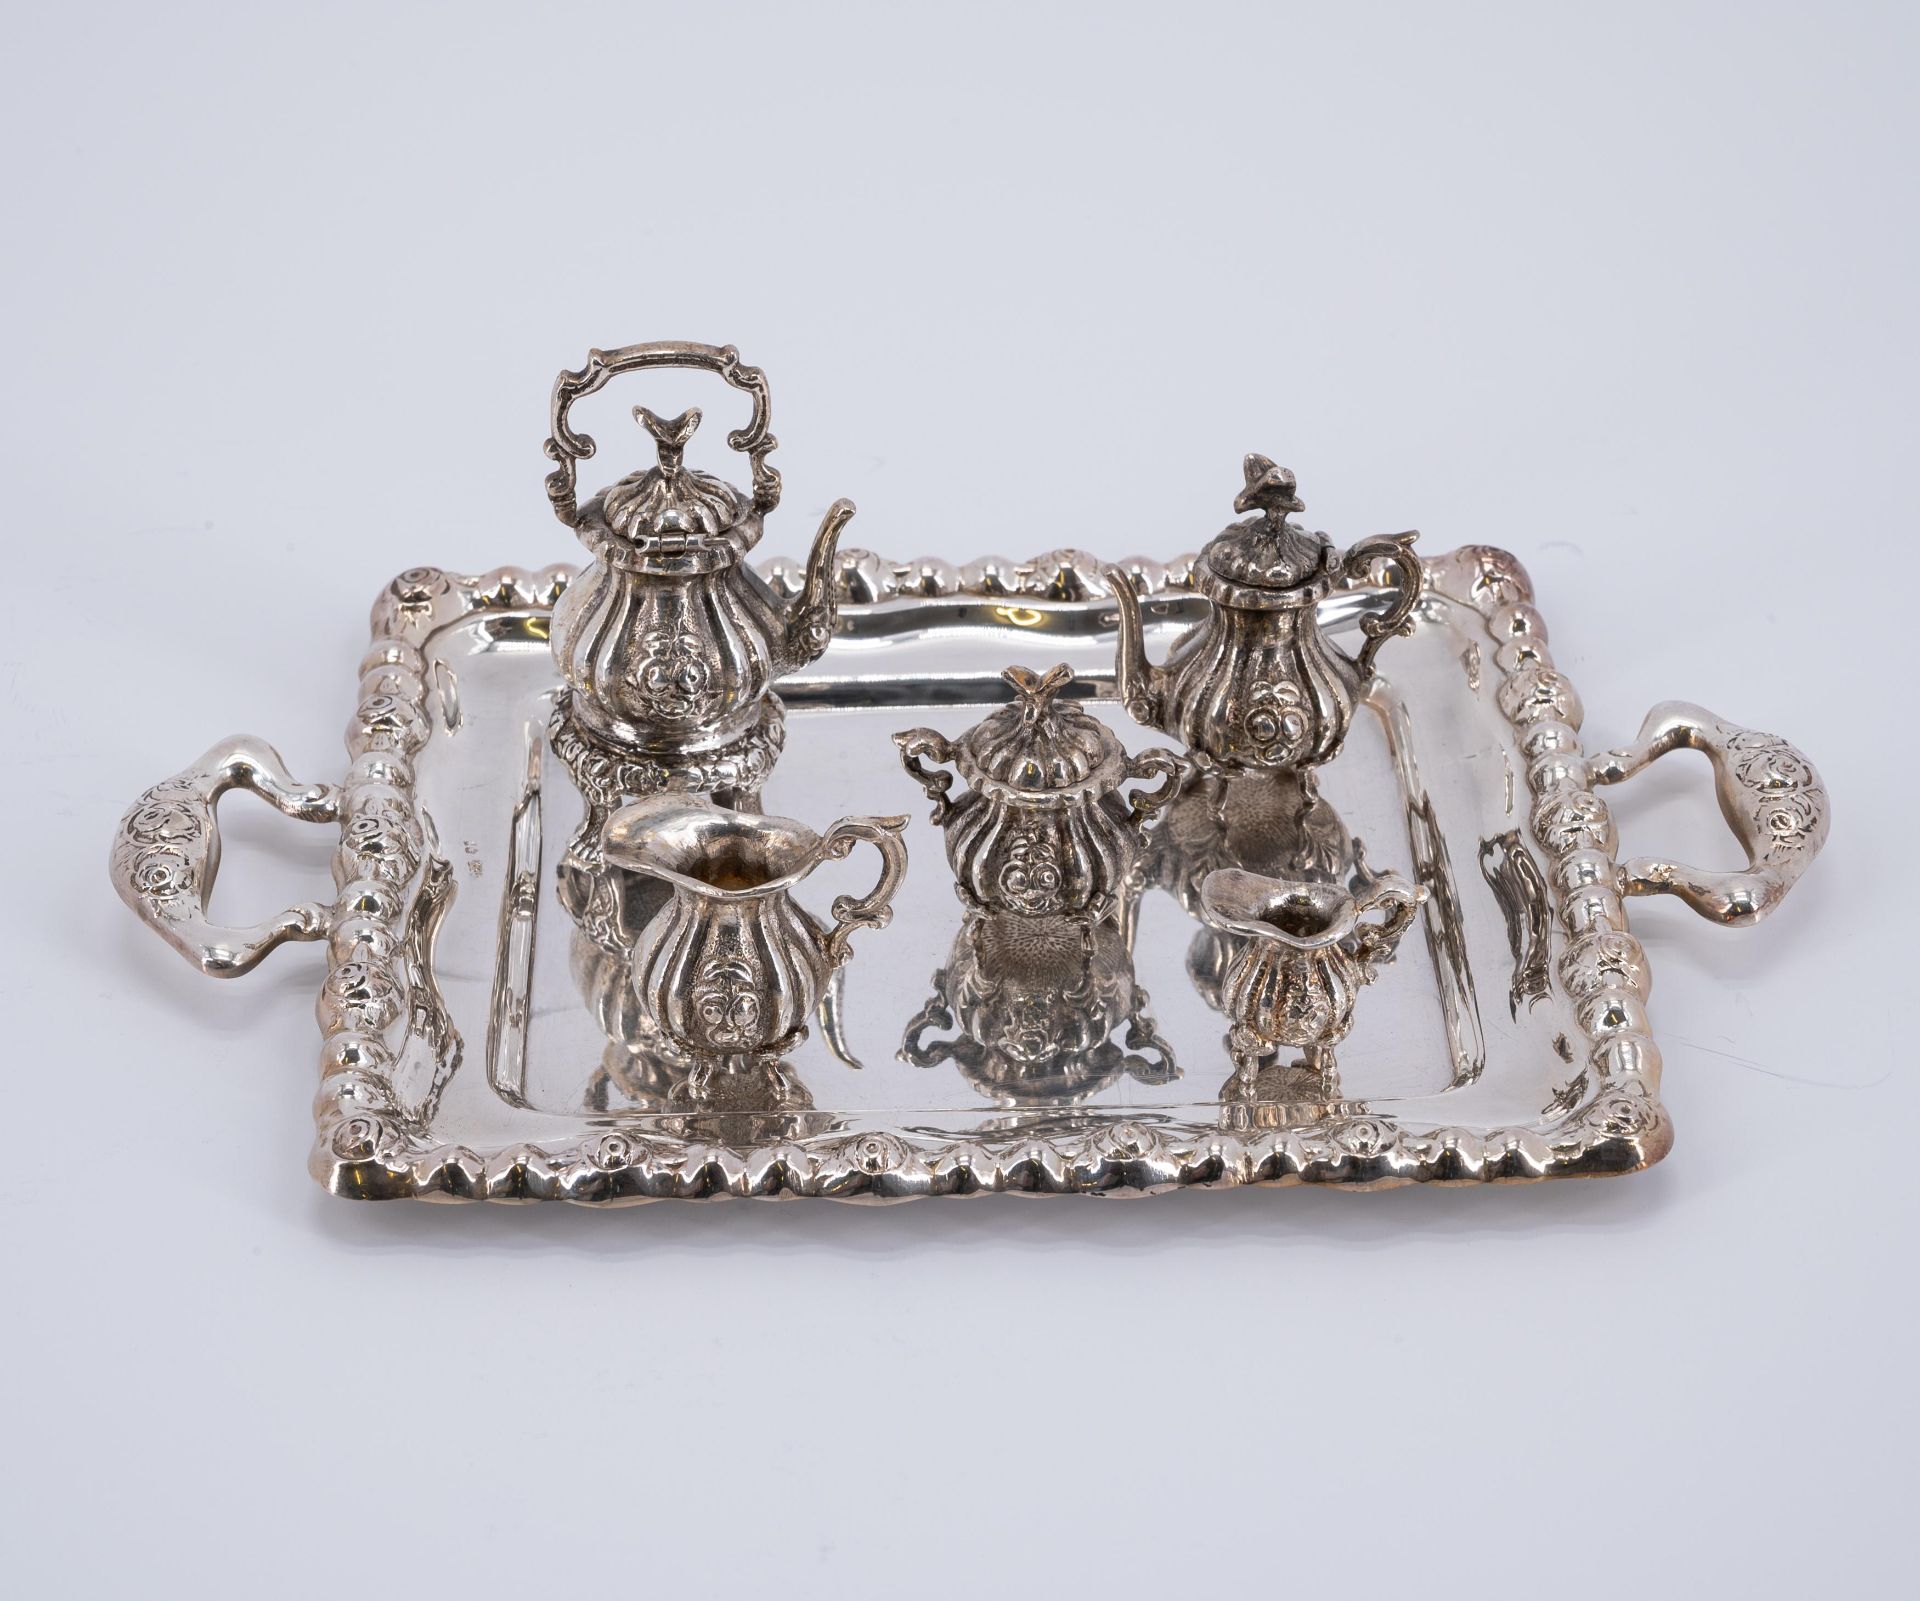 SILVER MINIATURE SERVICE, SIX MINIATURE PLATES AND TWICE SIX GOBLETS ON TRAY - Image 8 of 9